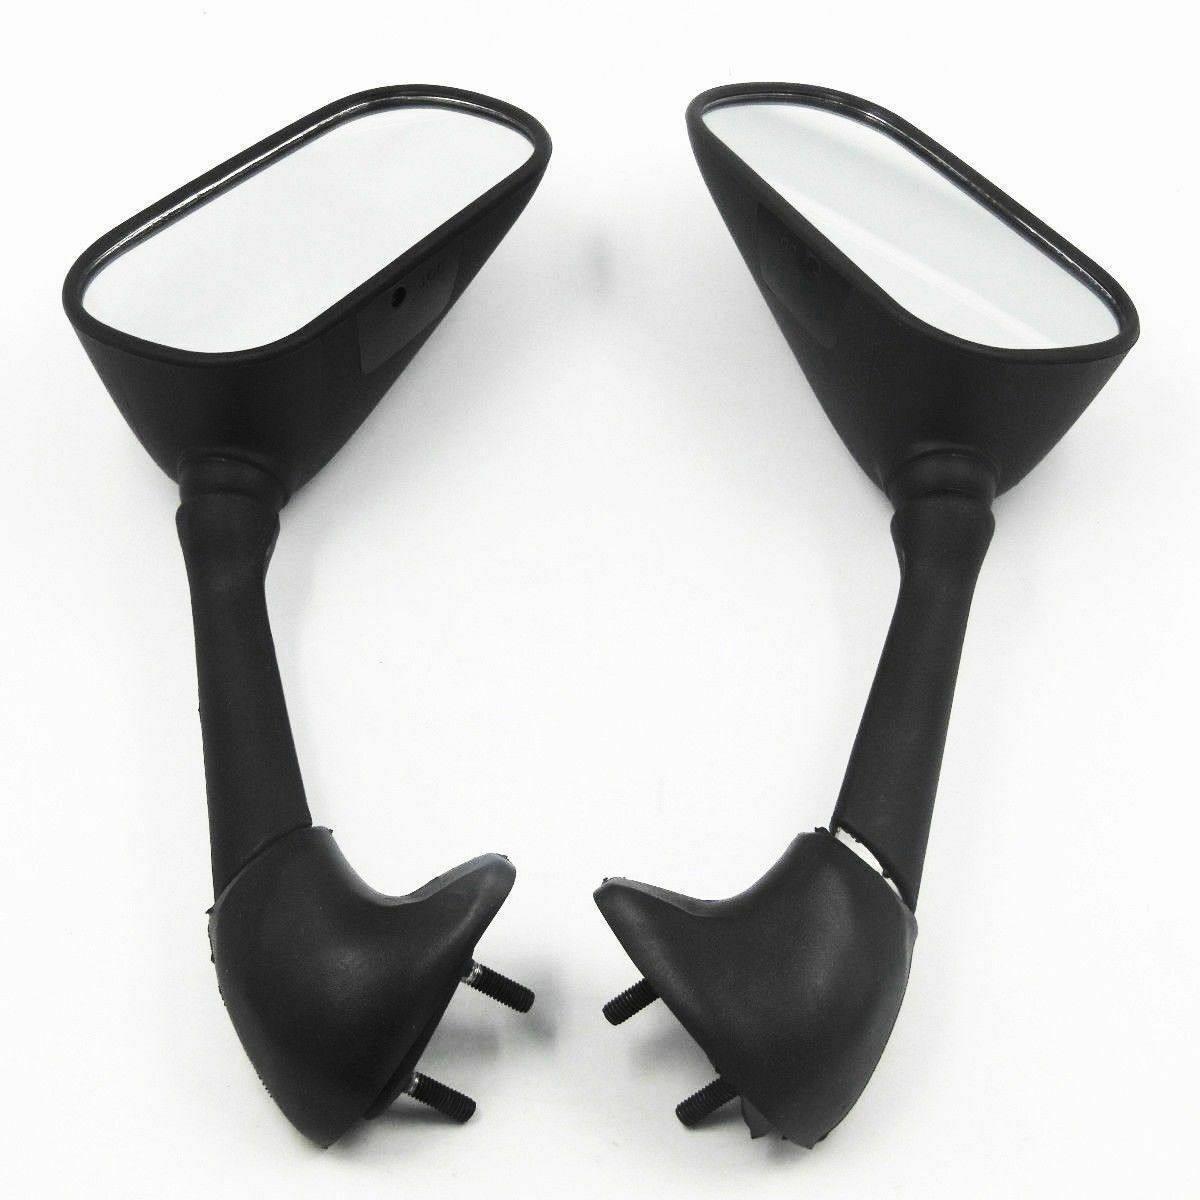 Black Motorcycle Side Mirrors For Yamaha YZF R1 2004 2005 2006